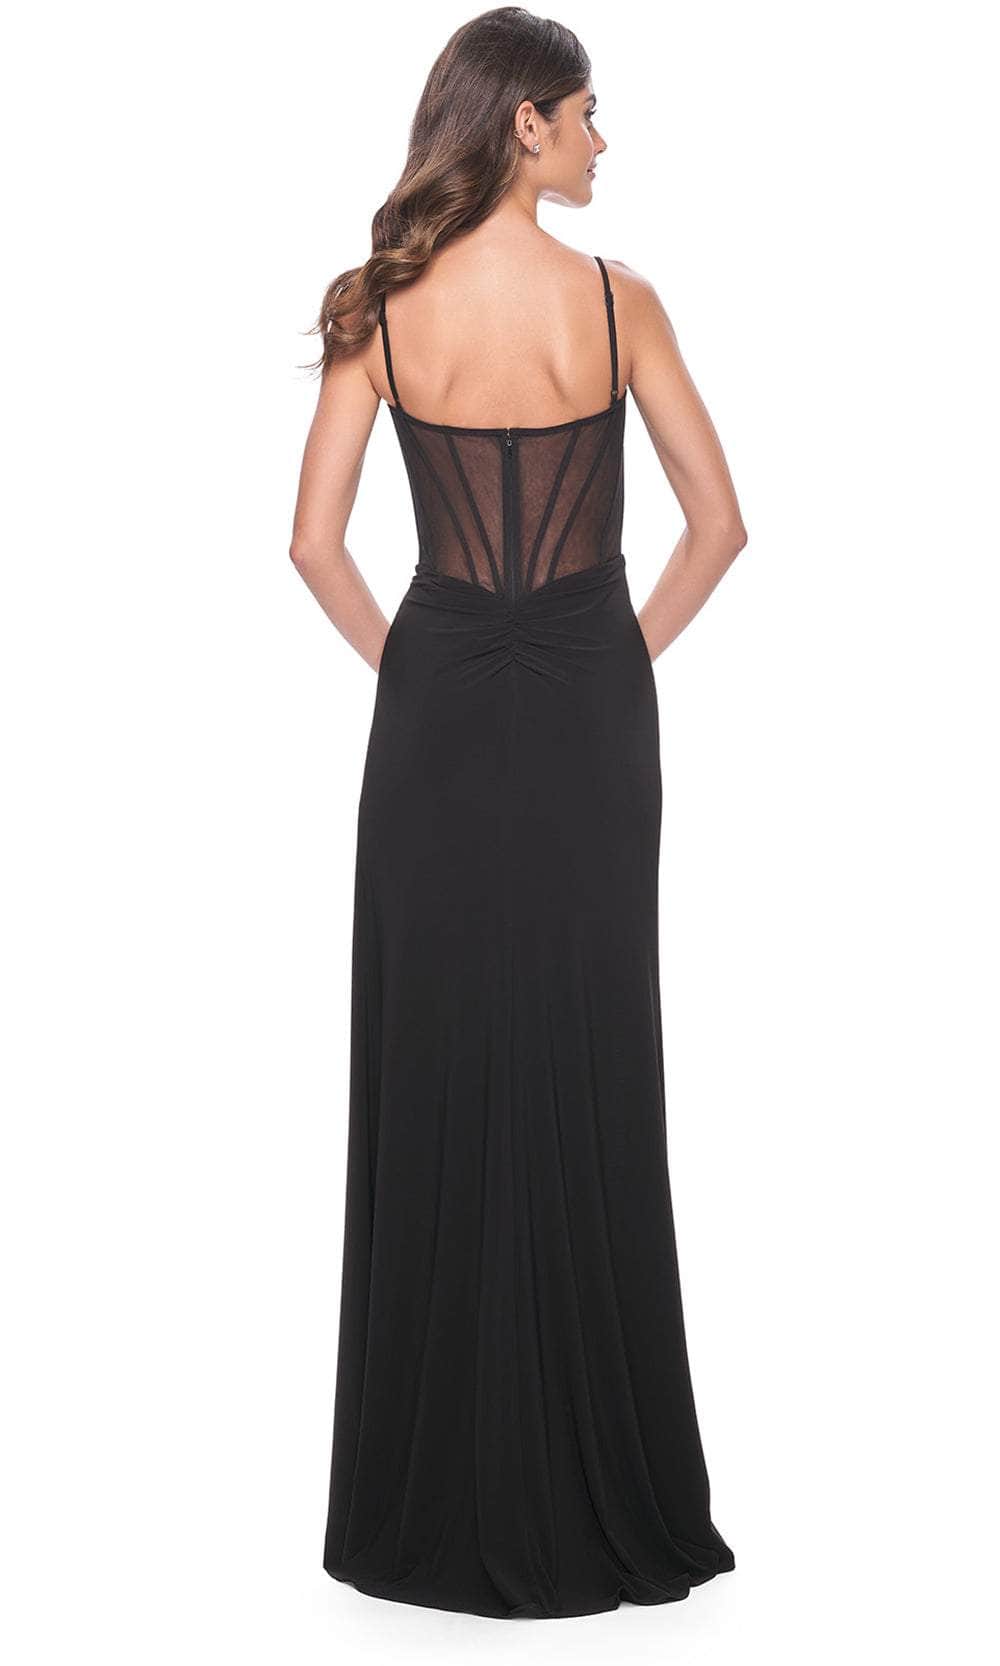 La Femme 32220 - Illusion Back Sheath Prom Gown Formal Gowns